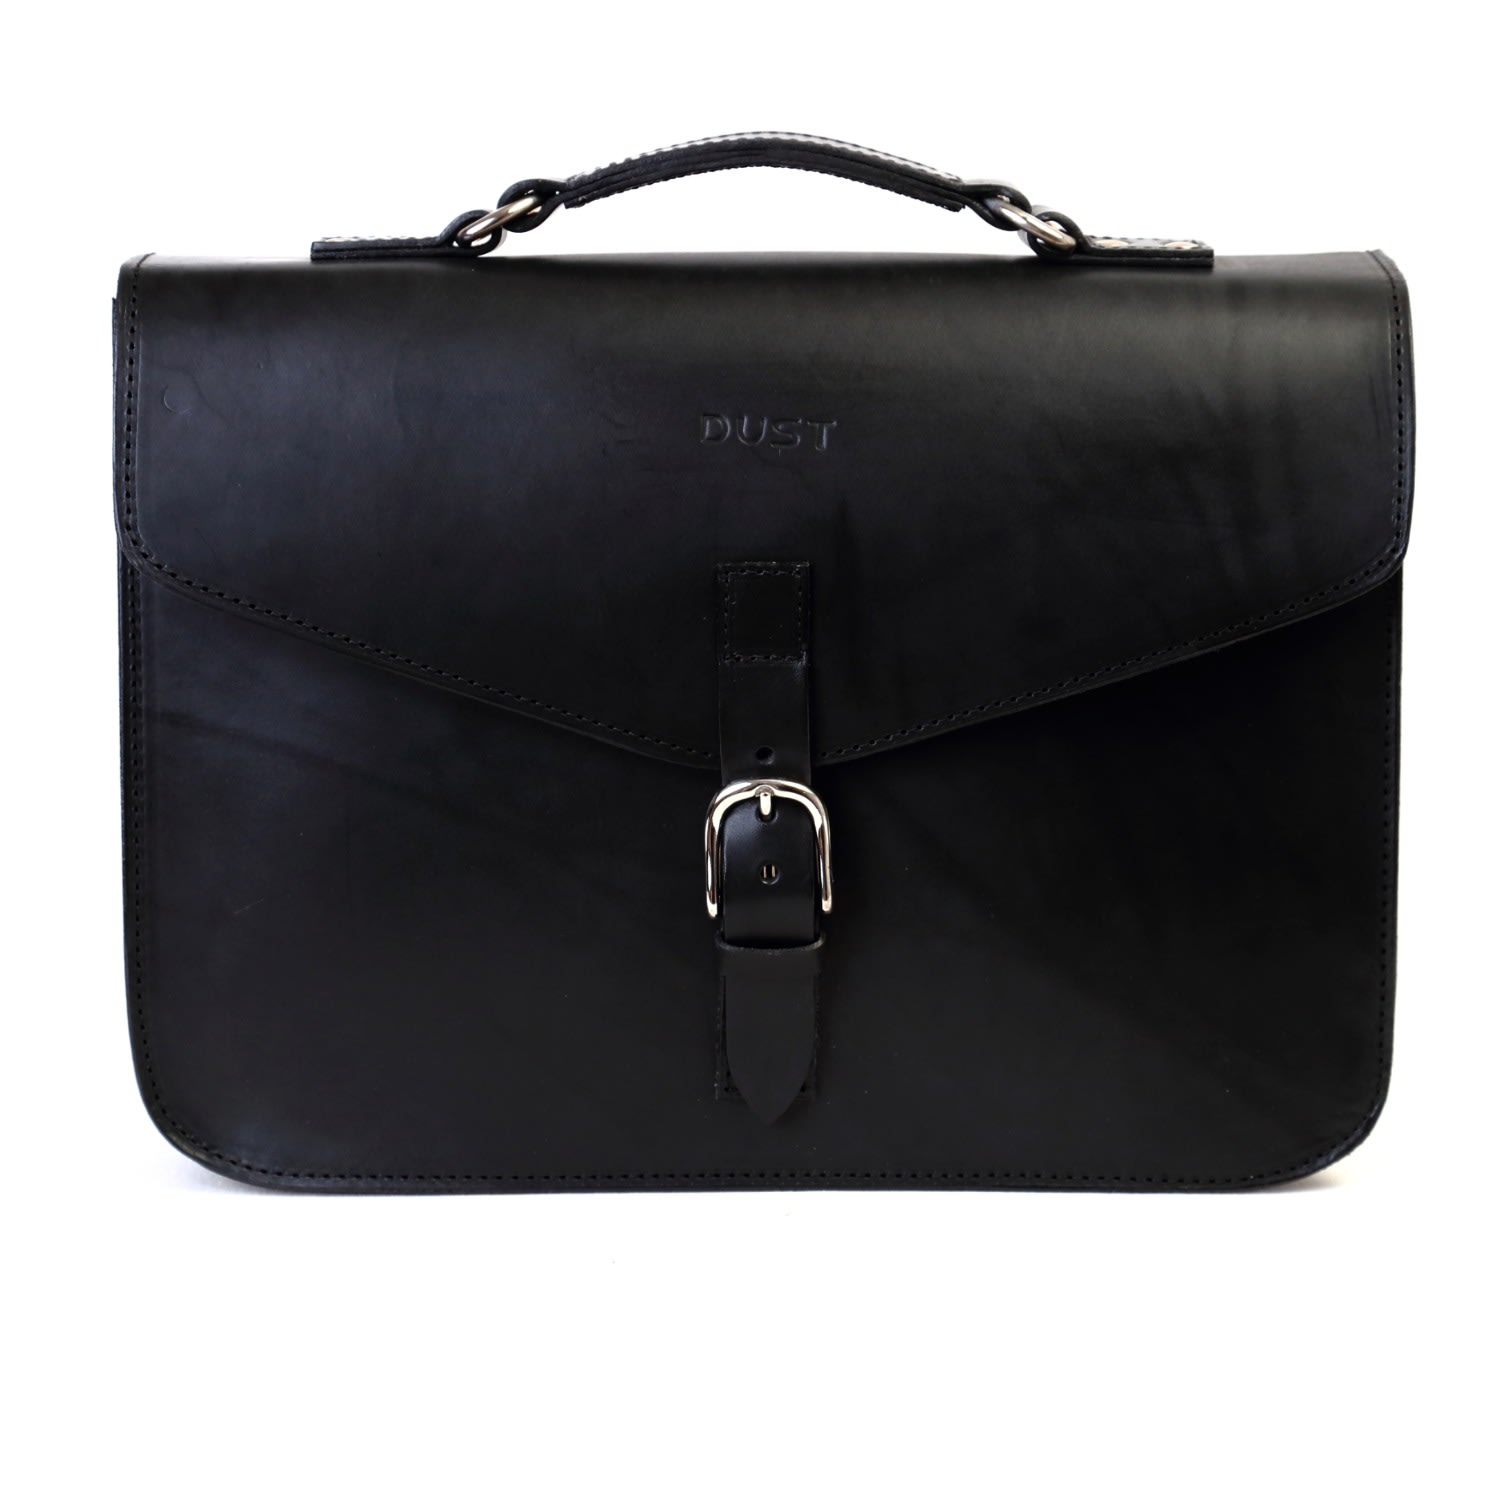 Men’s Black Leather Briefcase The Dust Company